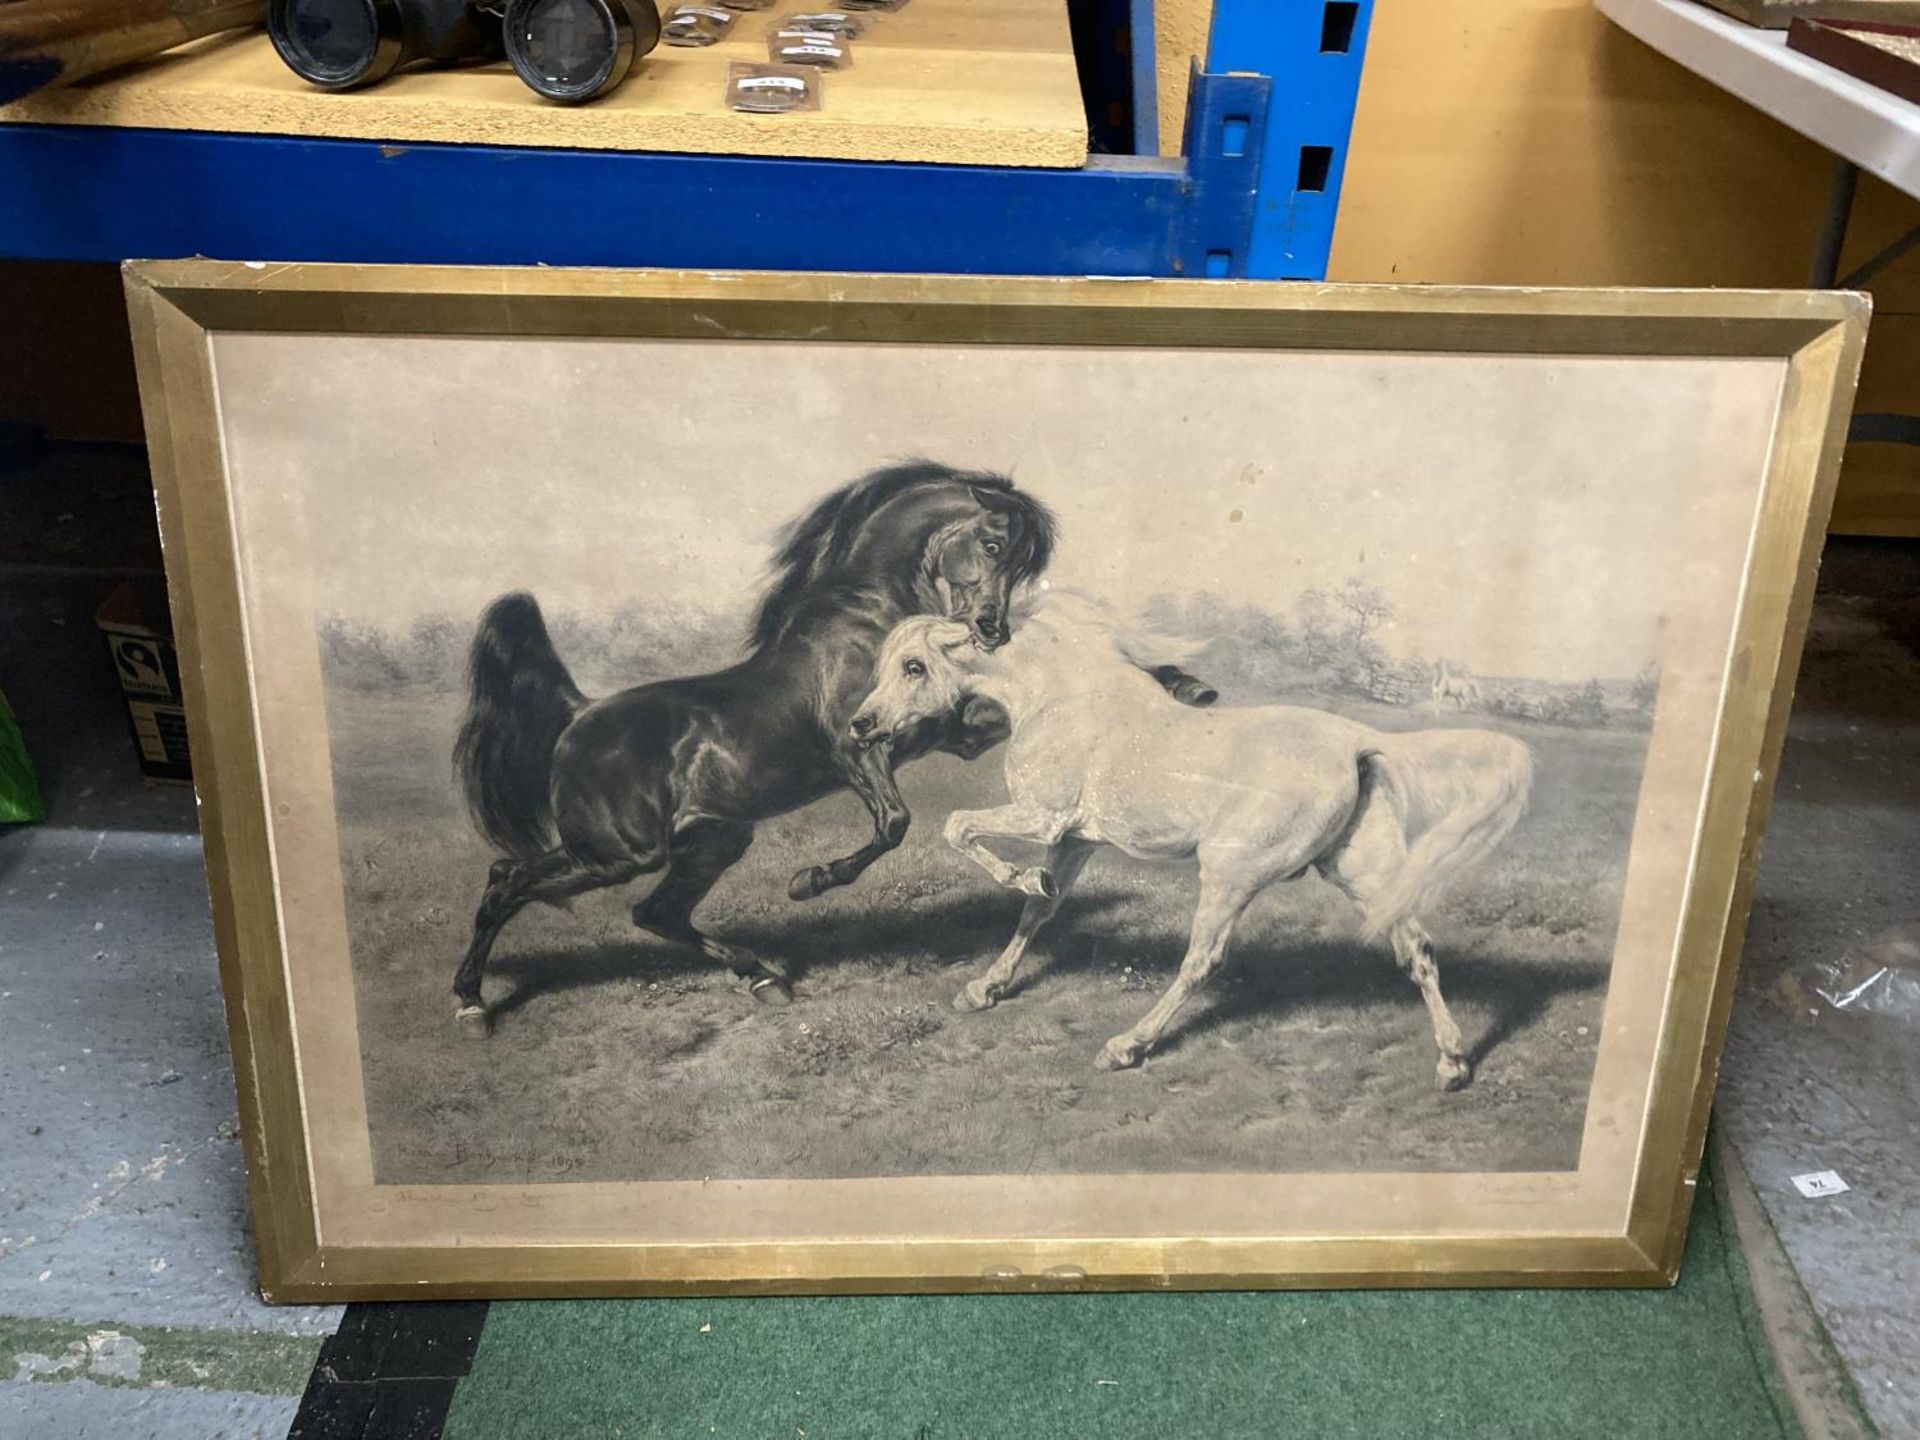 A FRAMED SIGNED PRINT OF A PAINTING BY ROSA BONHEUR OF TWO STALLIONS FIGHTING WITH GALLERY STAMP